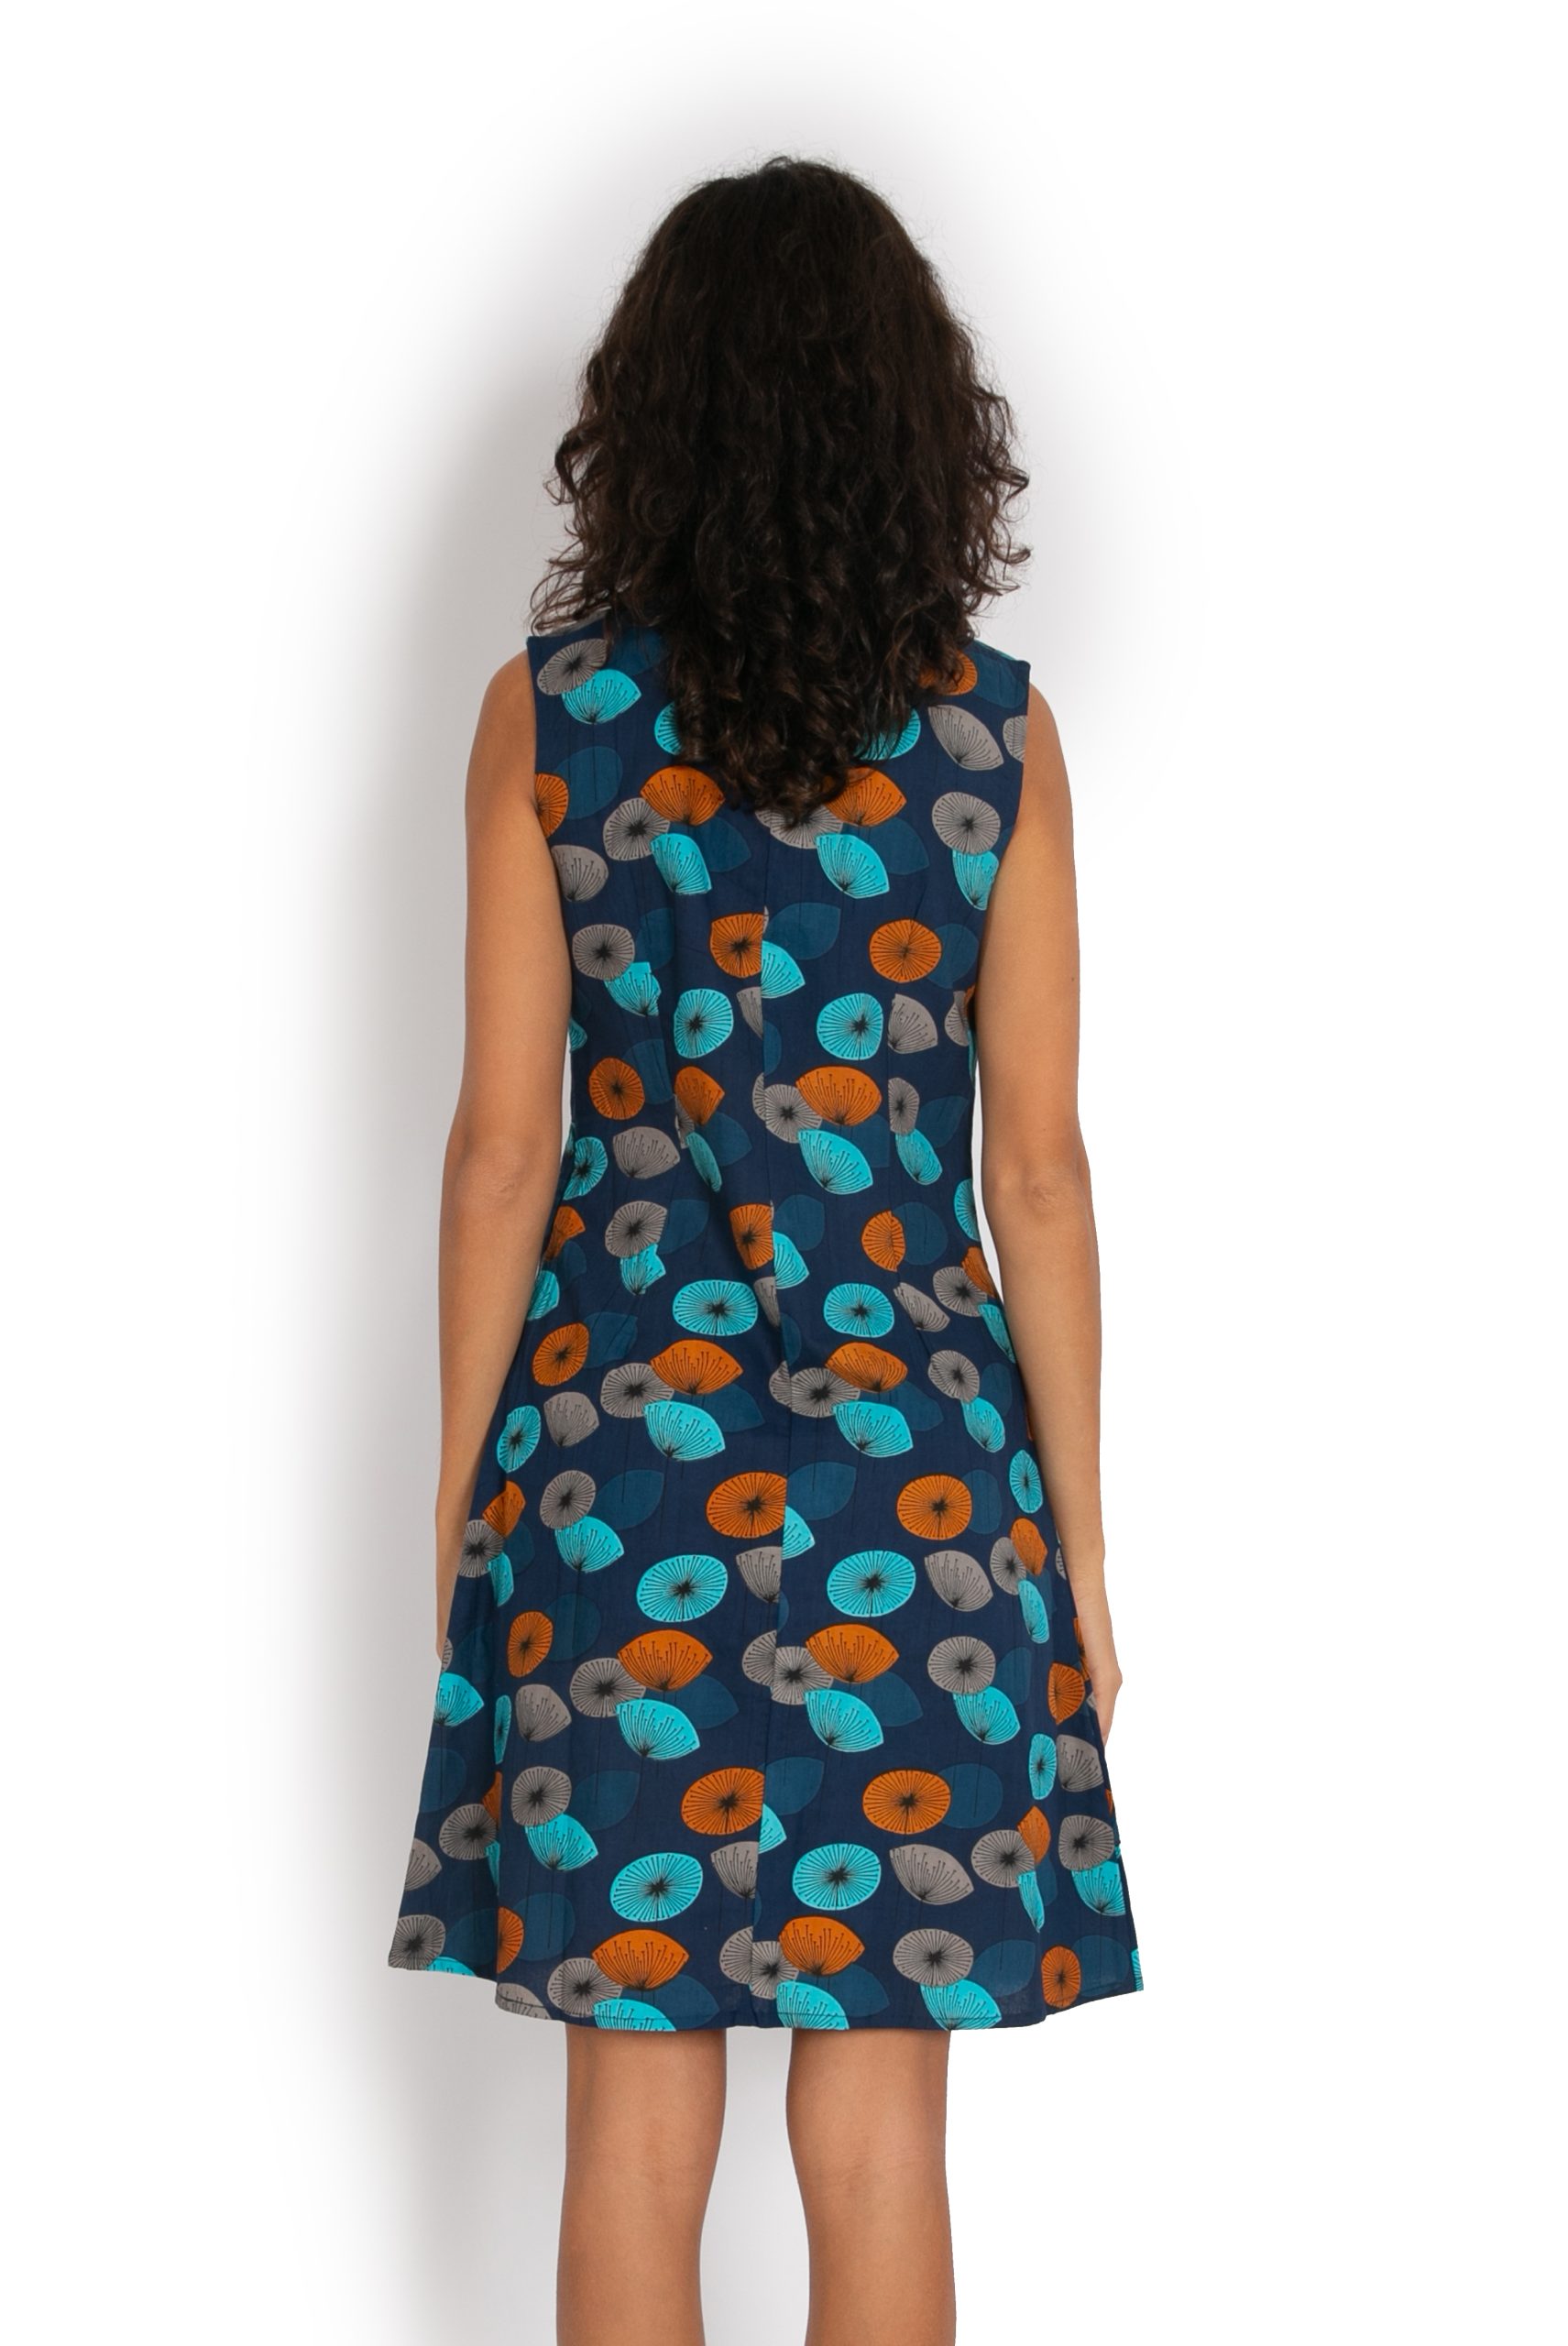 Charly Dress - Blossoms Blue - OM Designs